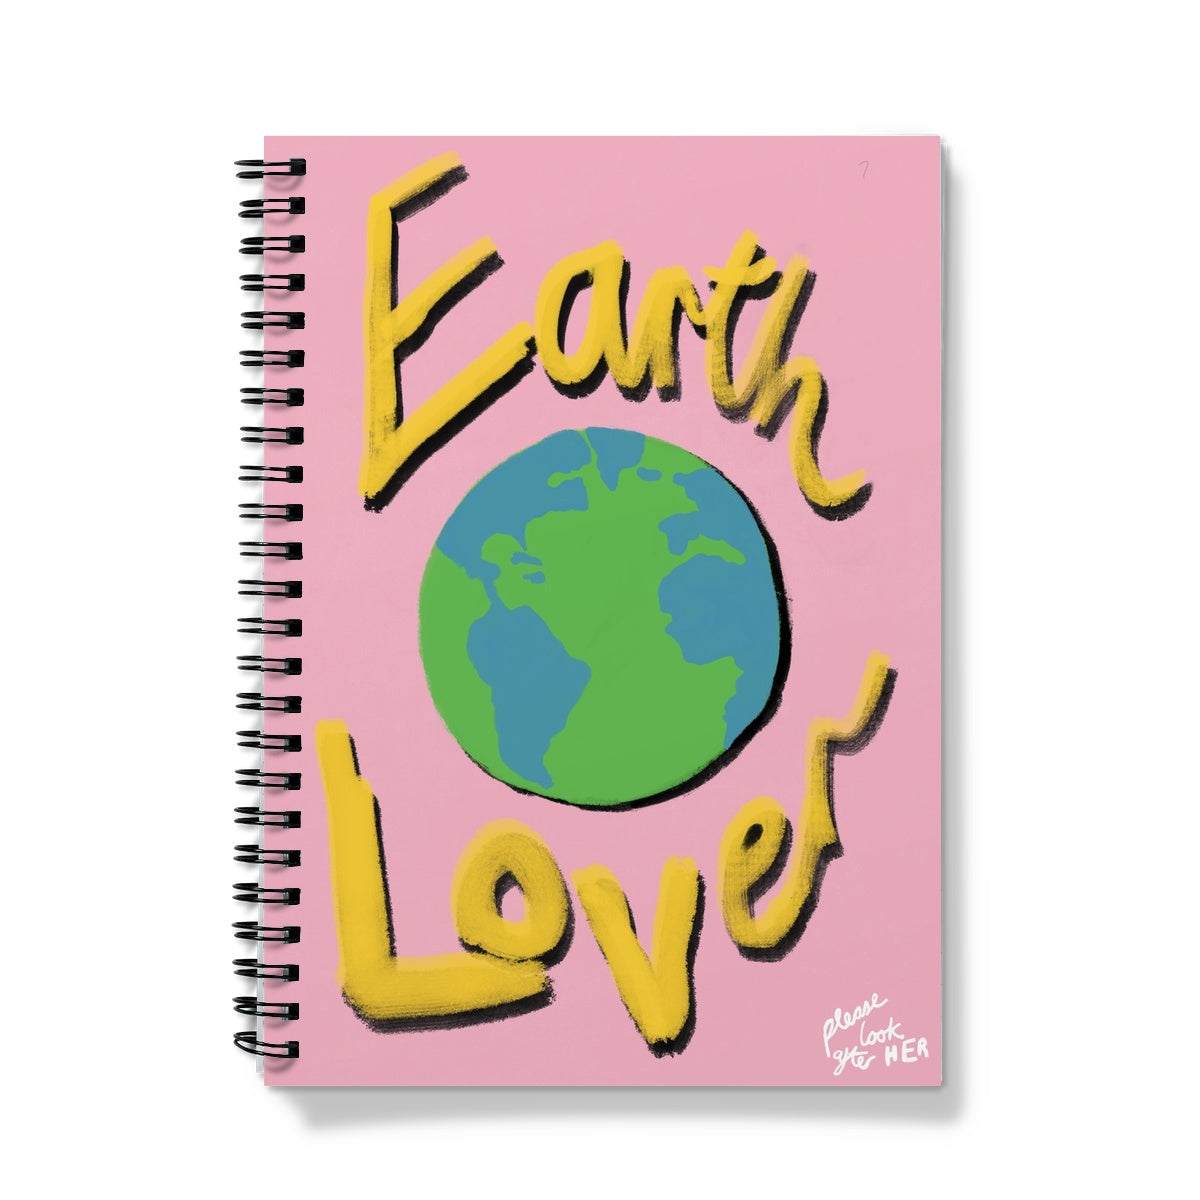 Earth Lover Print - Light Pink, Yellow Notebook